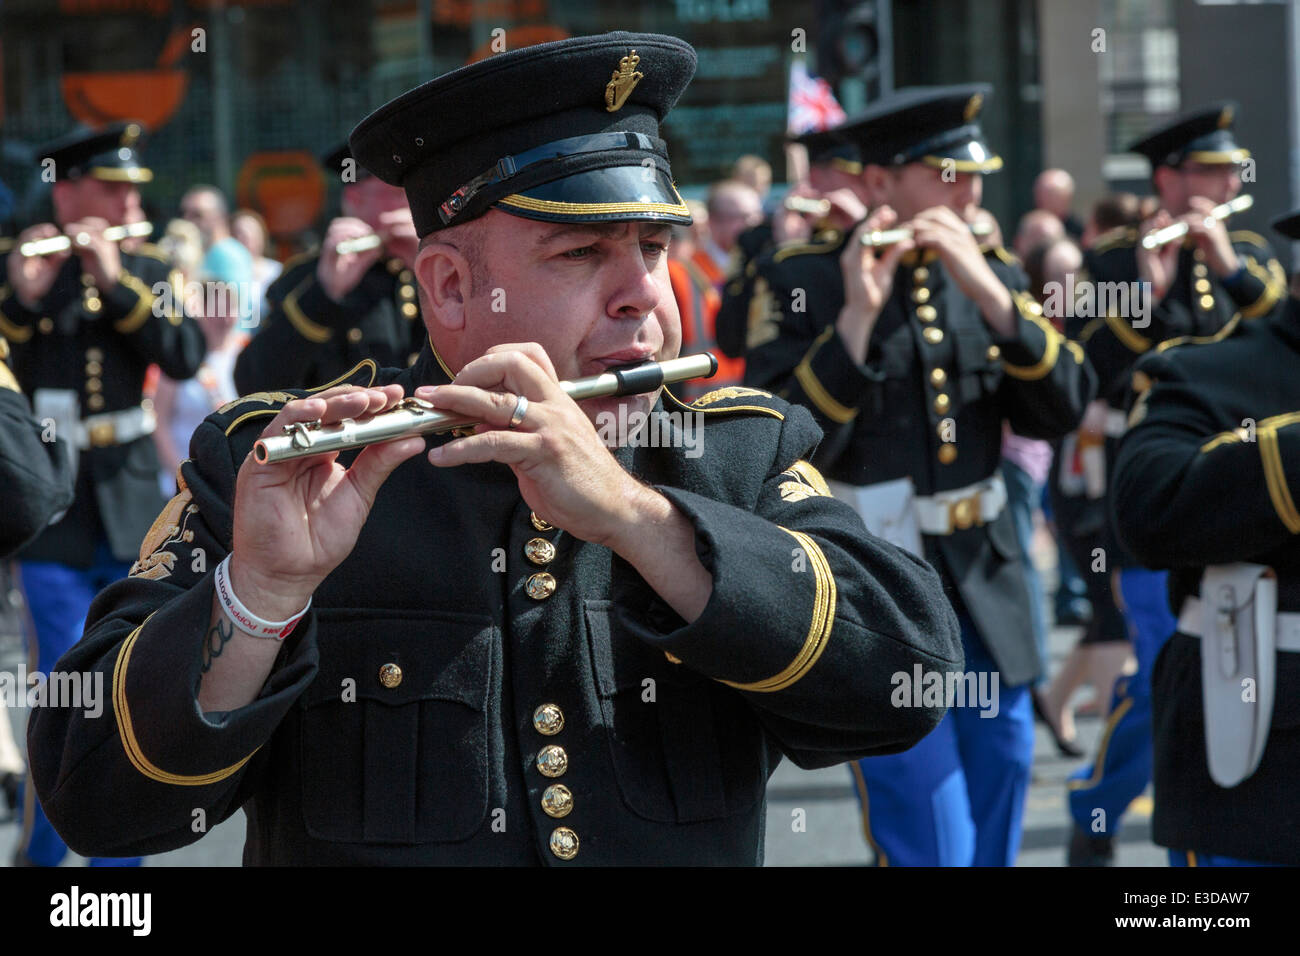 Man playing the flute, taking part in an Orange Walk parade through the streets of Glasgow, Scotland, UK Stock Photo